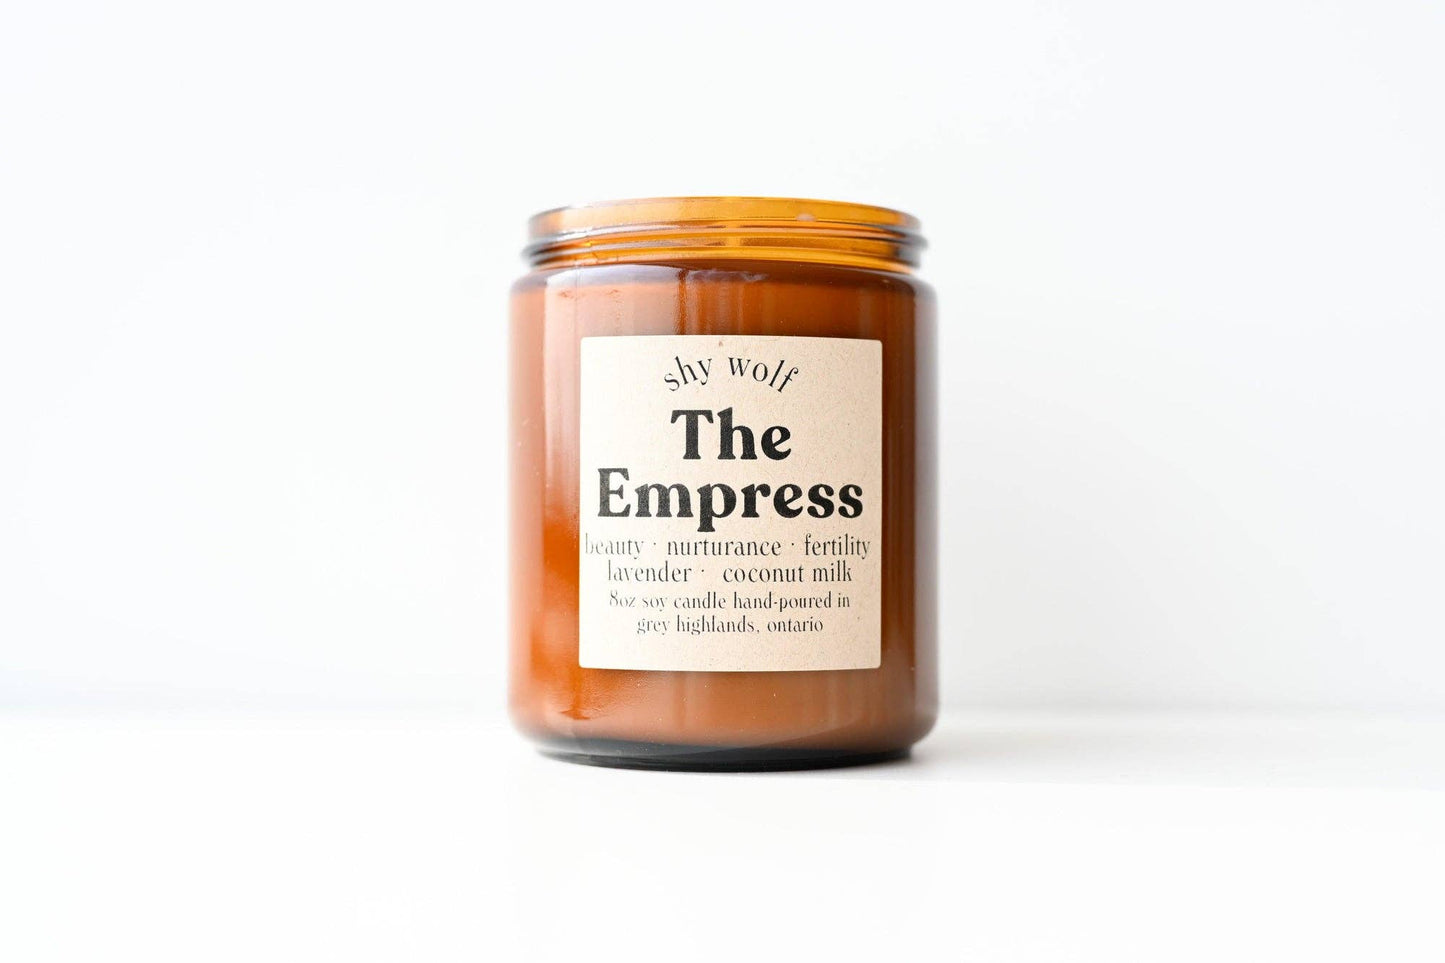 Tarot Cards Candle - The Empress - Lavender, Coconut Milk